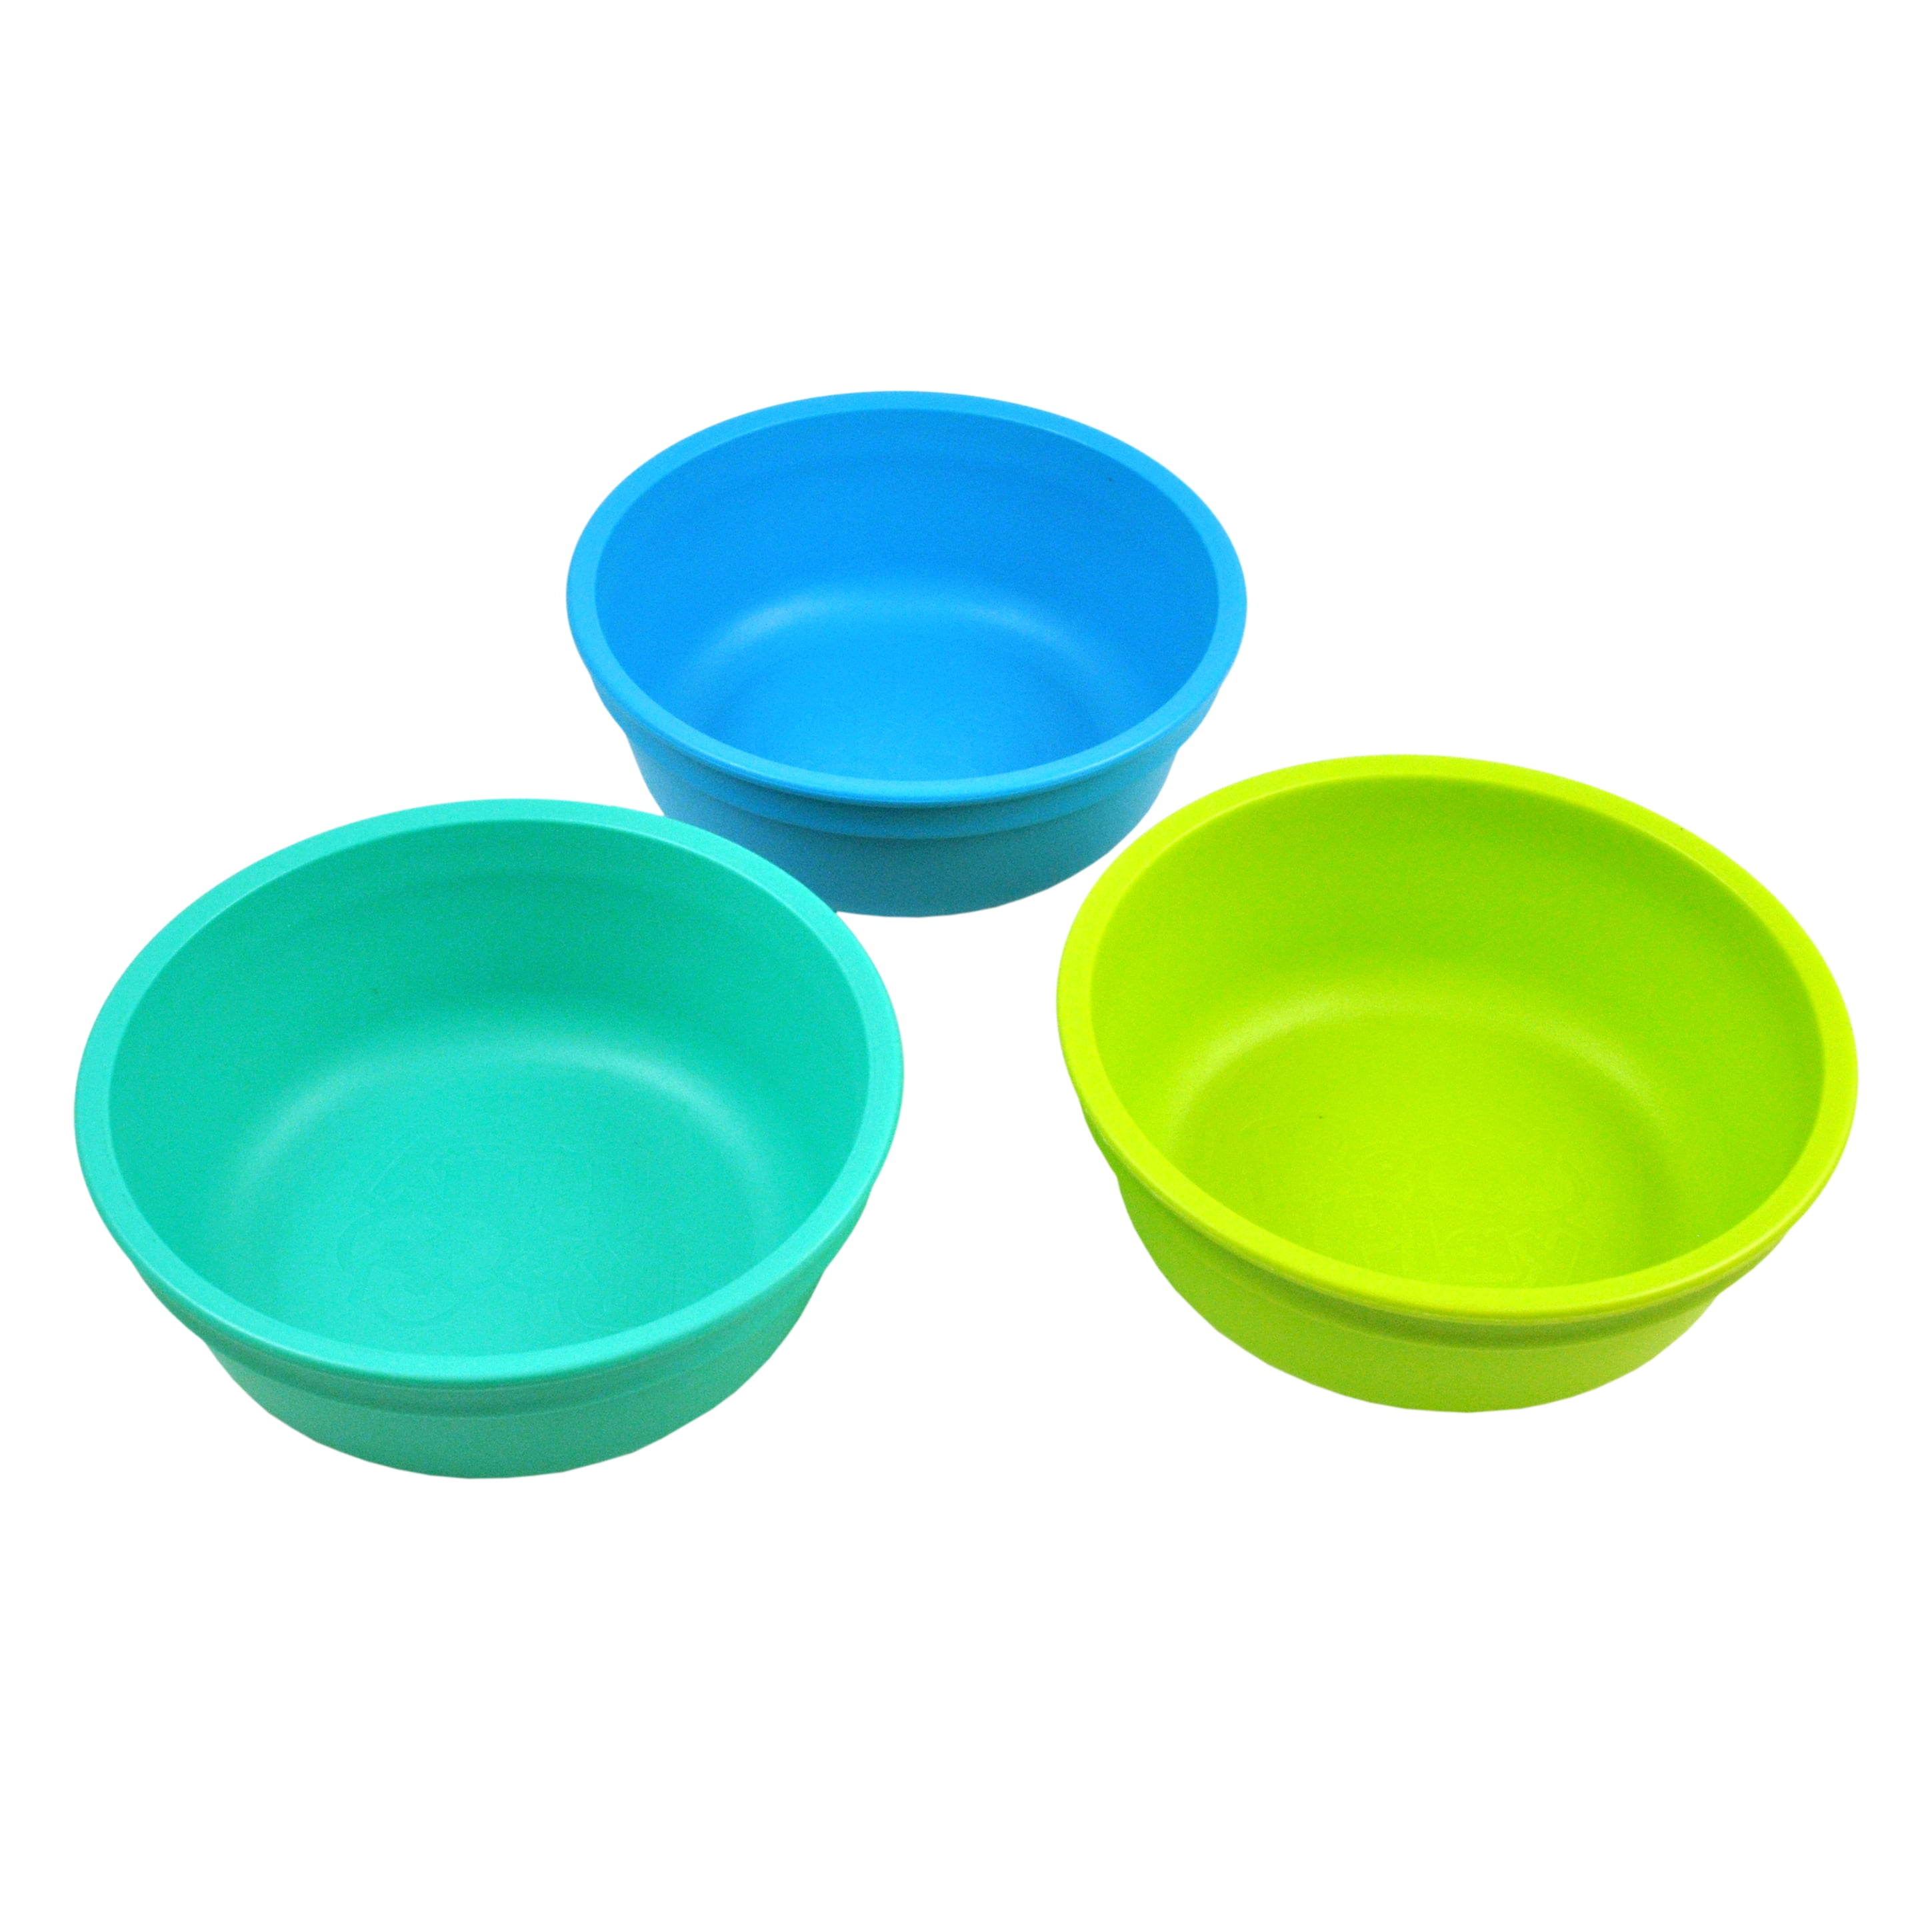 Re-Play Recycled Products Small Bowl 5 Bowls Re-Think It Inc. Set of 4 5 Bowls, Black Set of 4